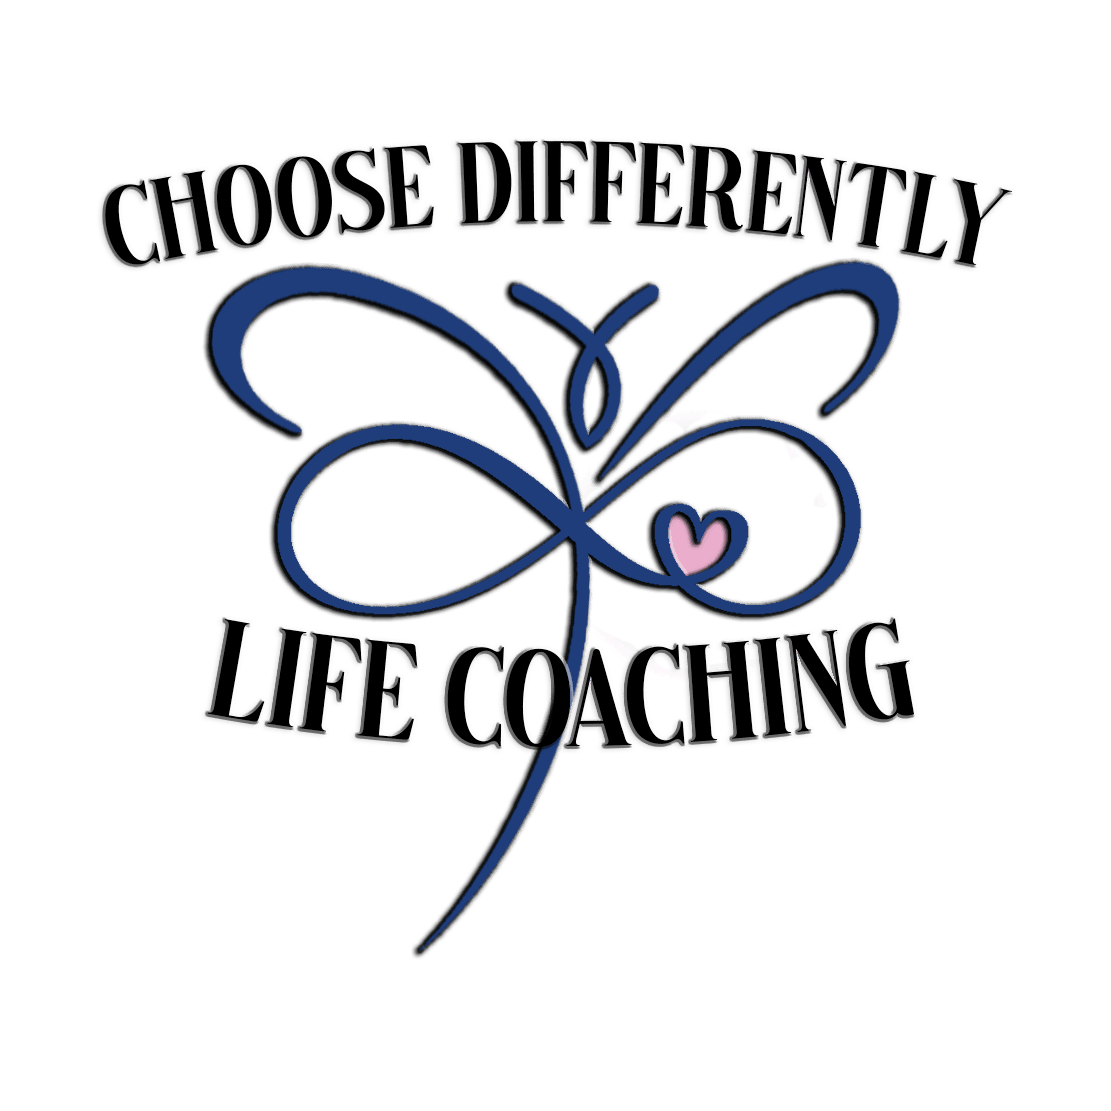 Choose Differently Life Coaching